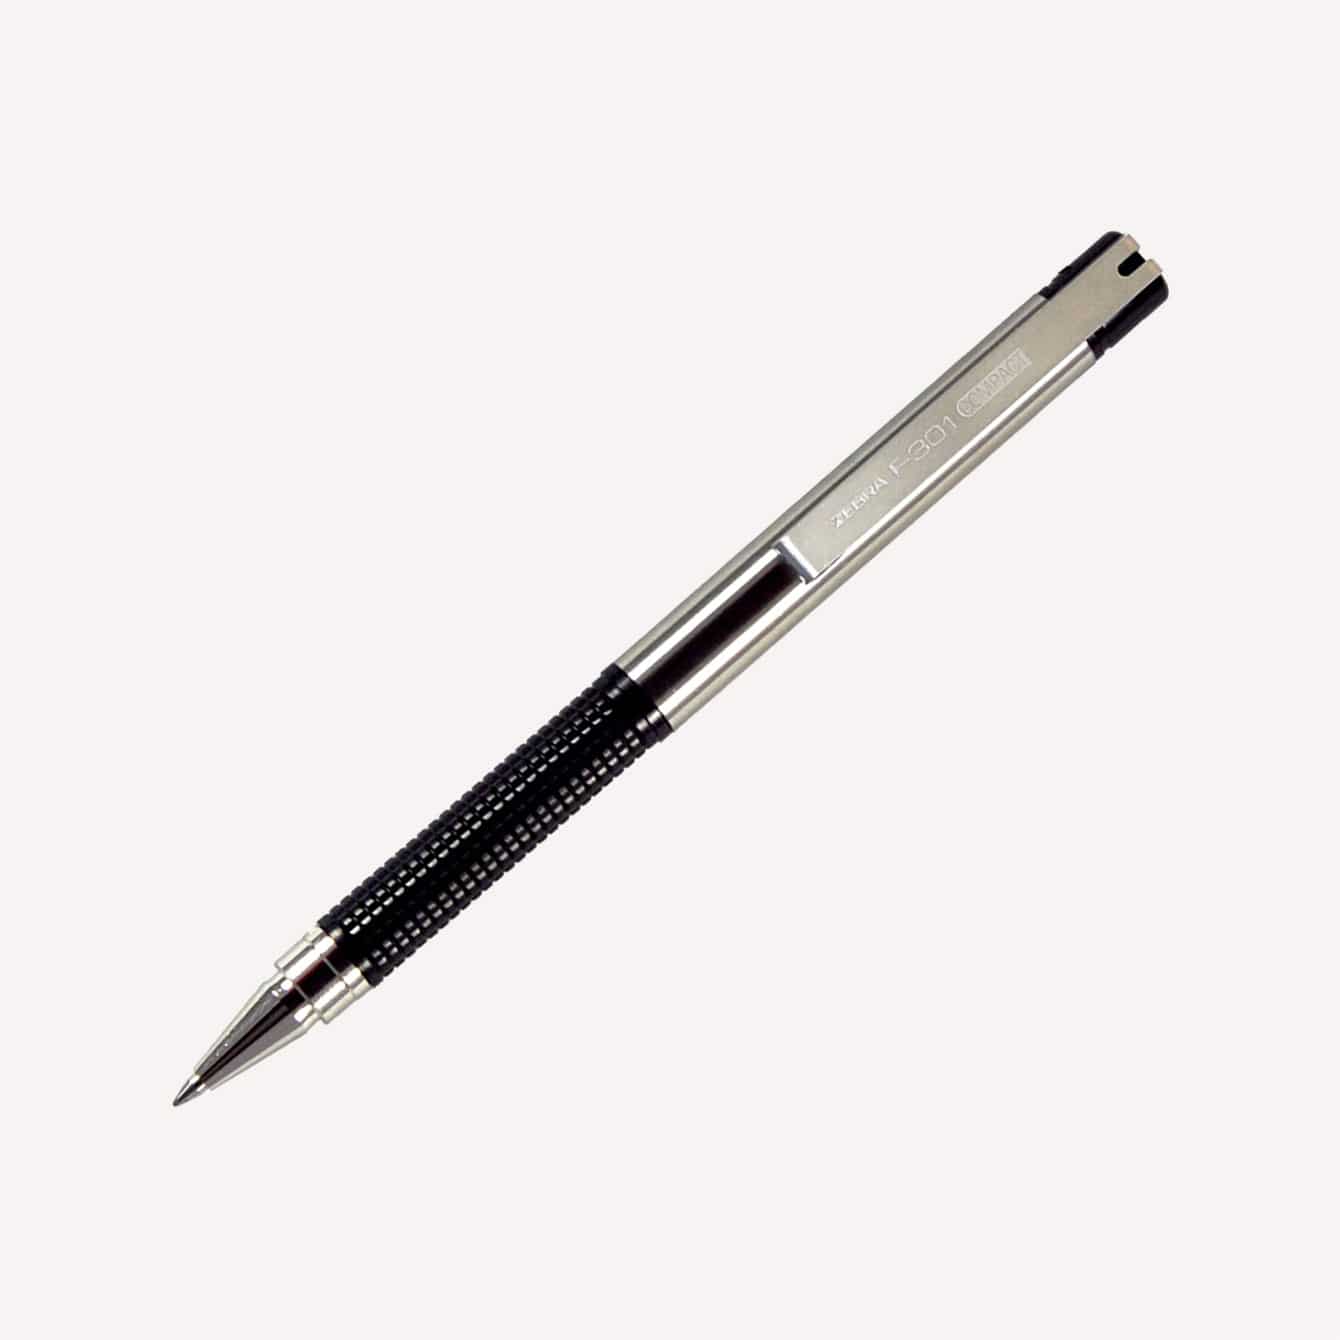 https://www.themodestman.com/wp-content/uploads/2021/08/Zebra-F-301-Compact-Ballpoint-Stainless-Steel-Retractable-Pen-Fine-Point-0.7mm-Black-Ink-2-Count.jpg